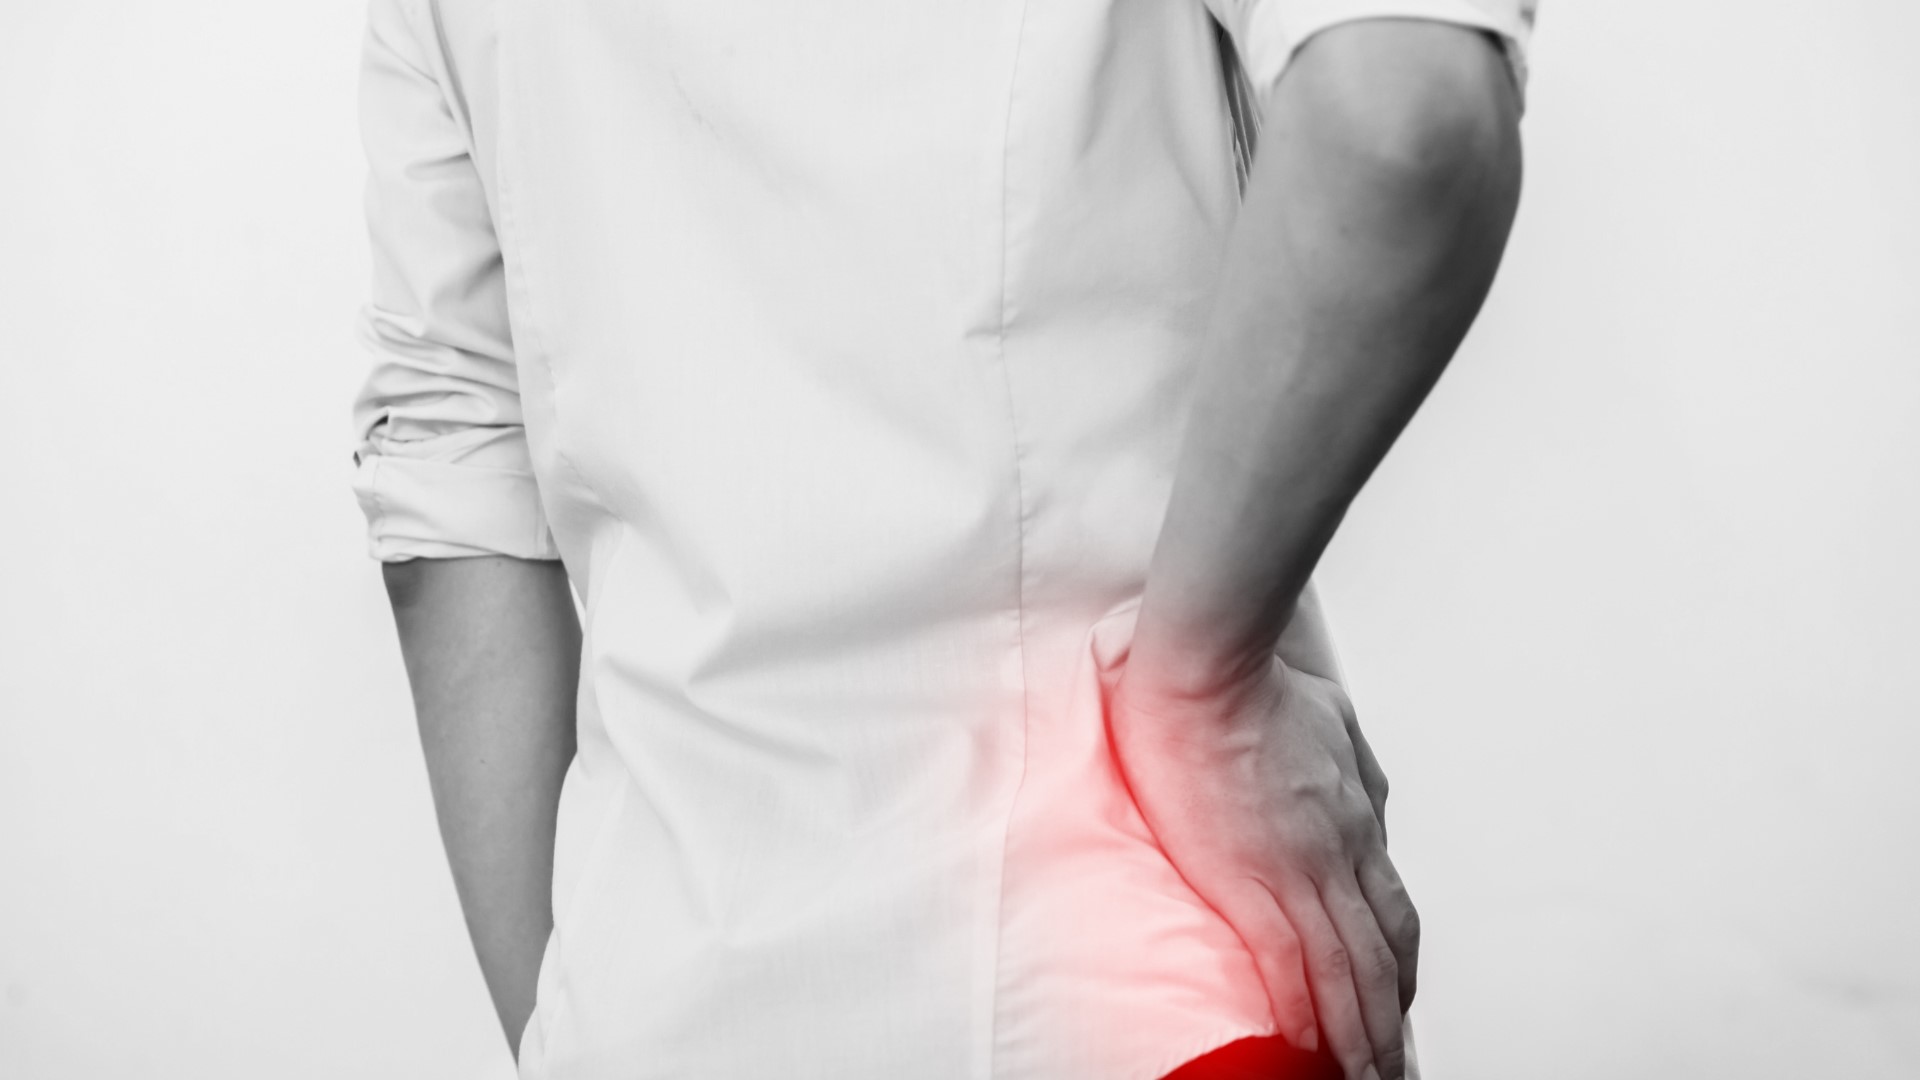 Hip pain can really impact our everyday life. There are things you can do at home before heading to the doctor.